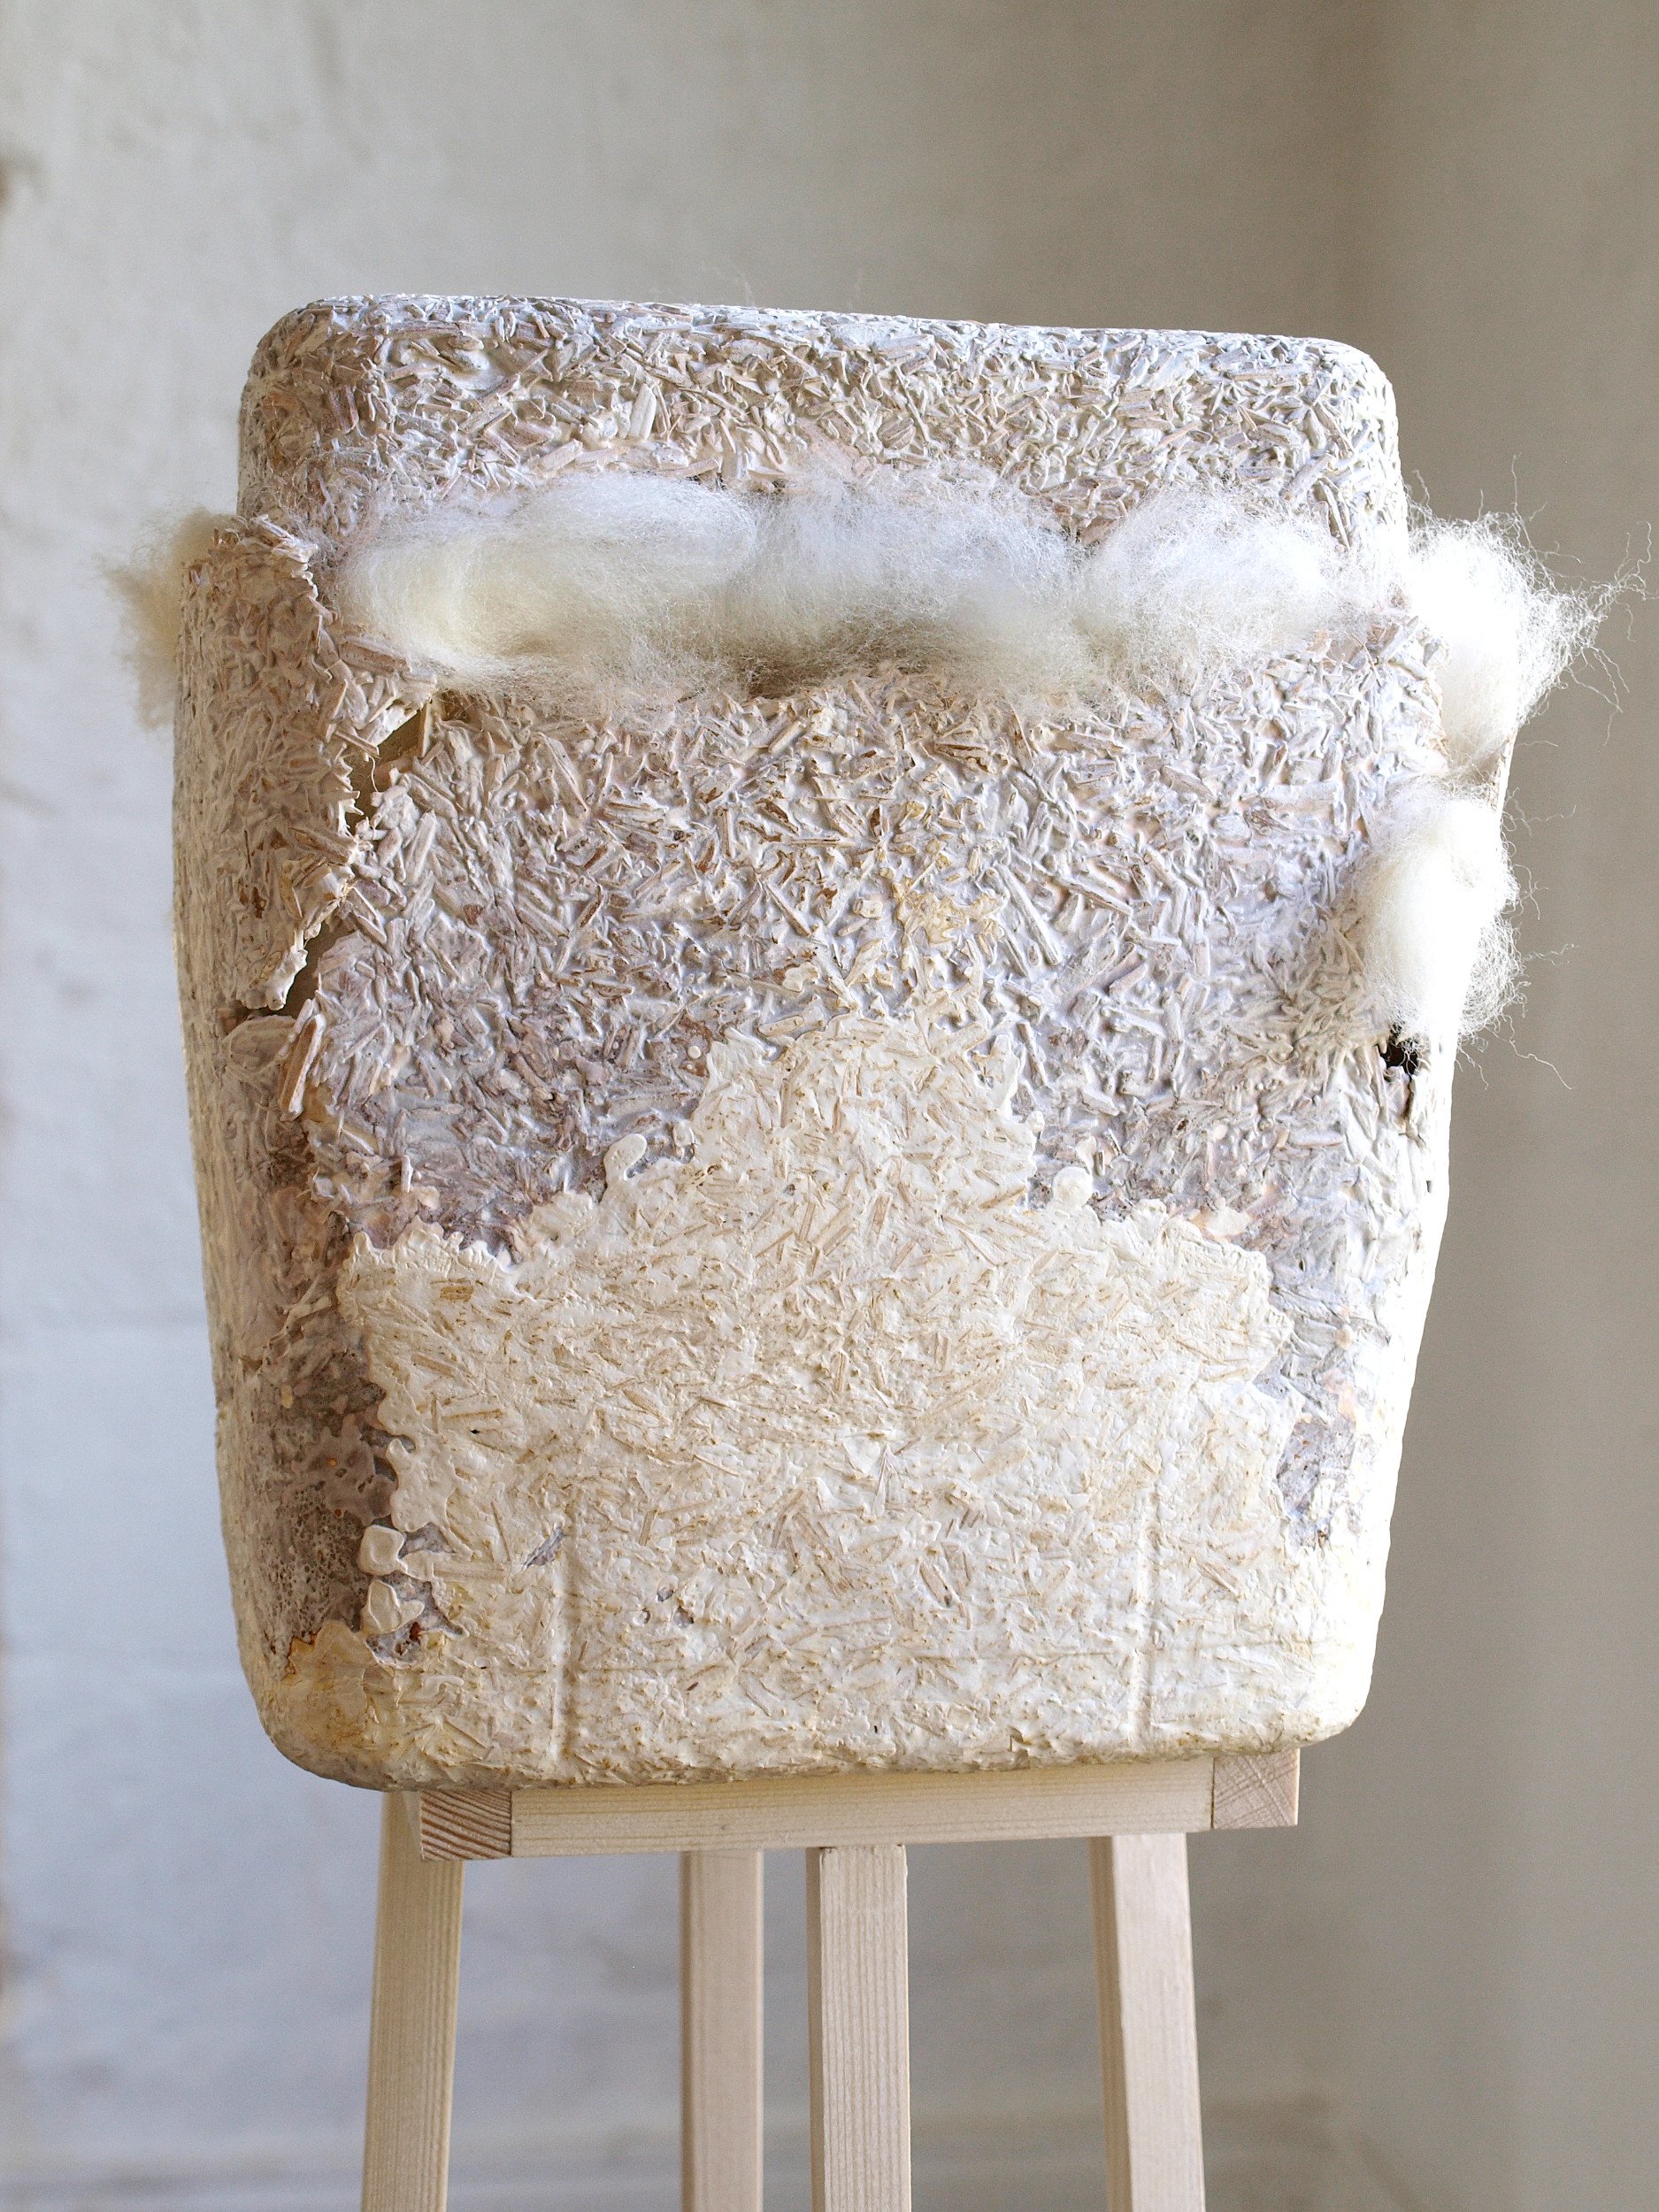  Kelly M O’Brien,  Protective Nature . Cast mycelium, wool, wood. 160 x 30 x 30 cm ©2022 Image: Kate McDonnell 